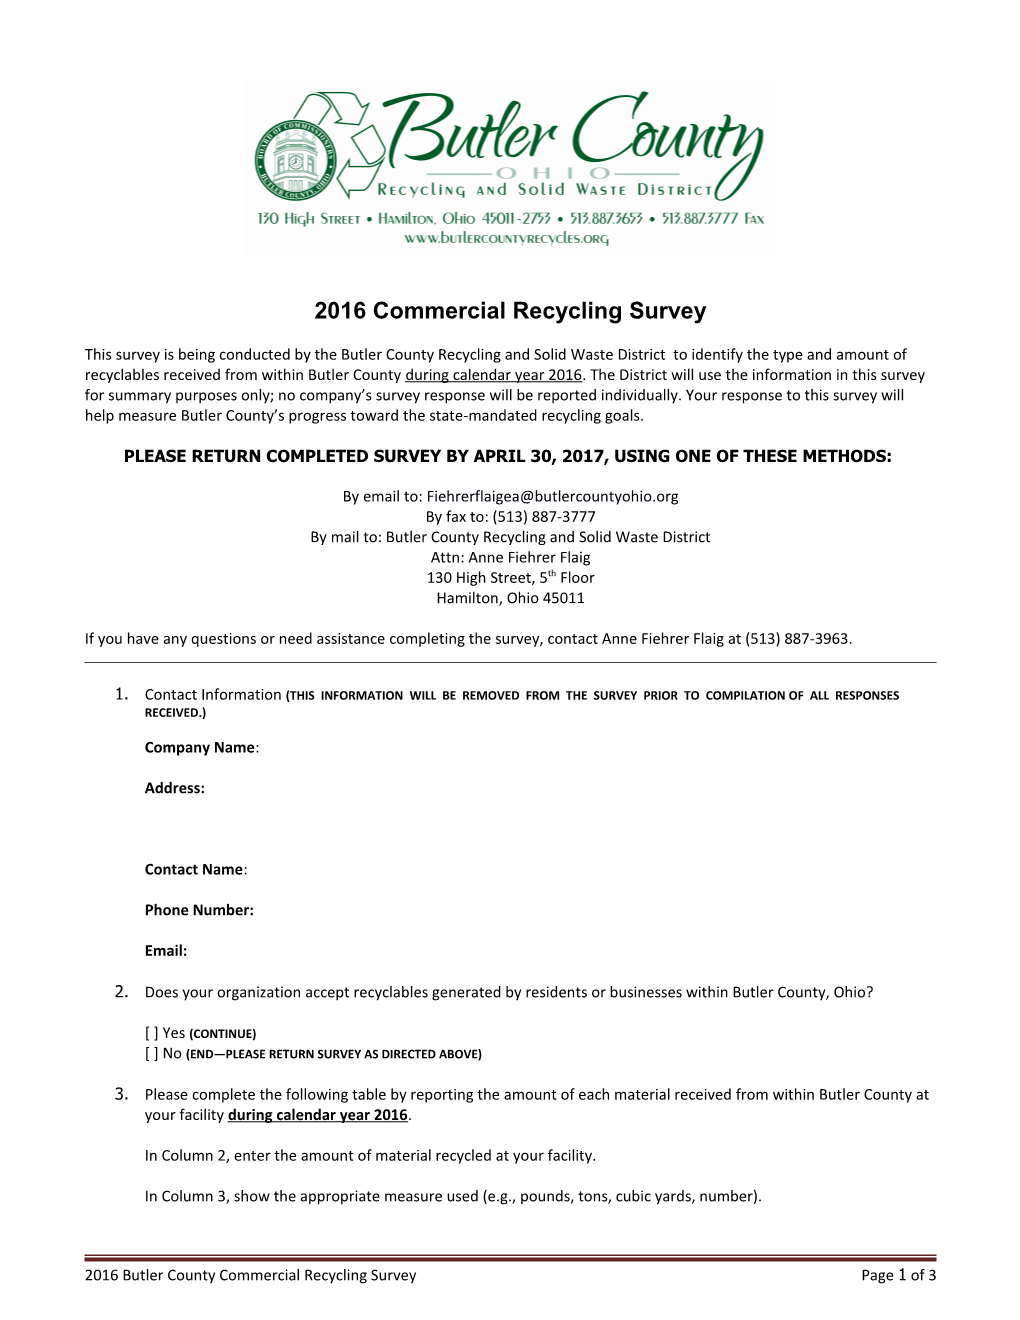 2016Commercial Recycling Survey